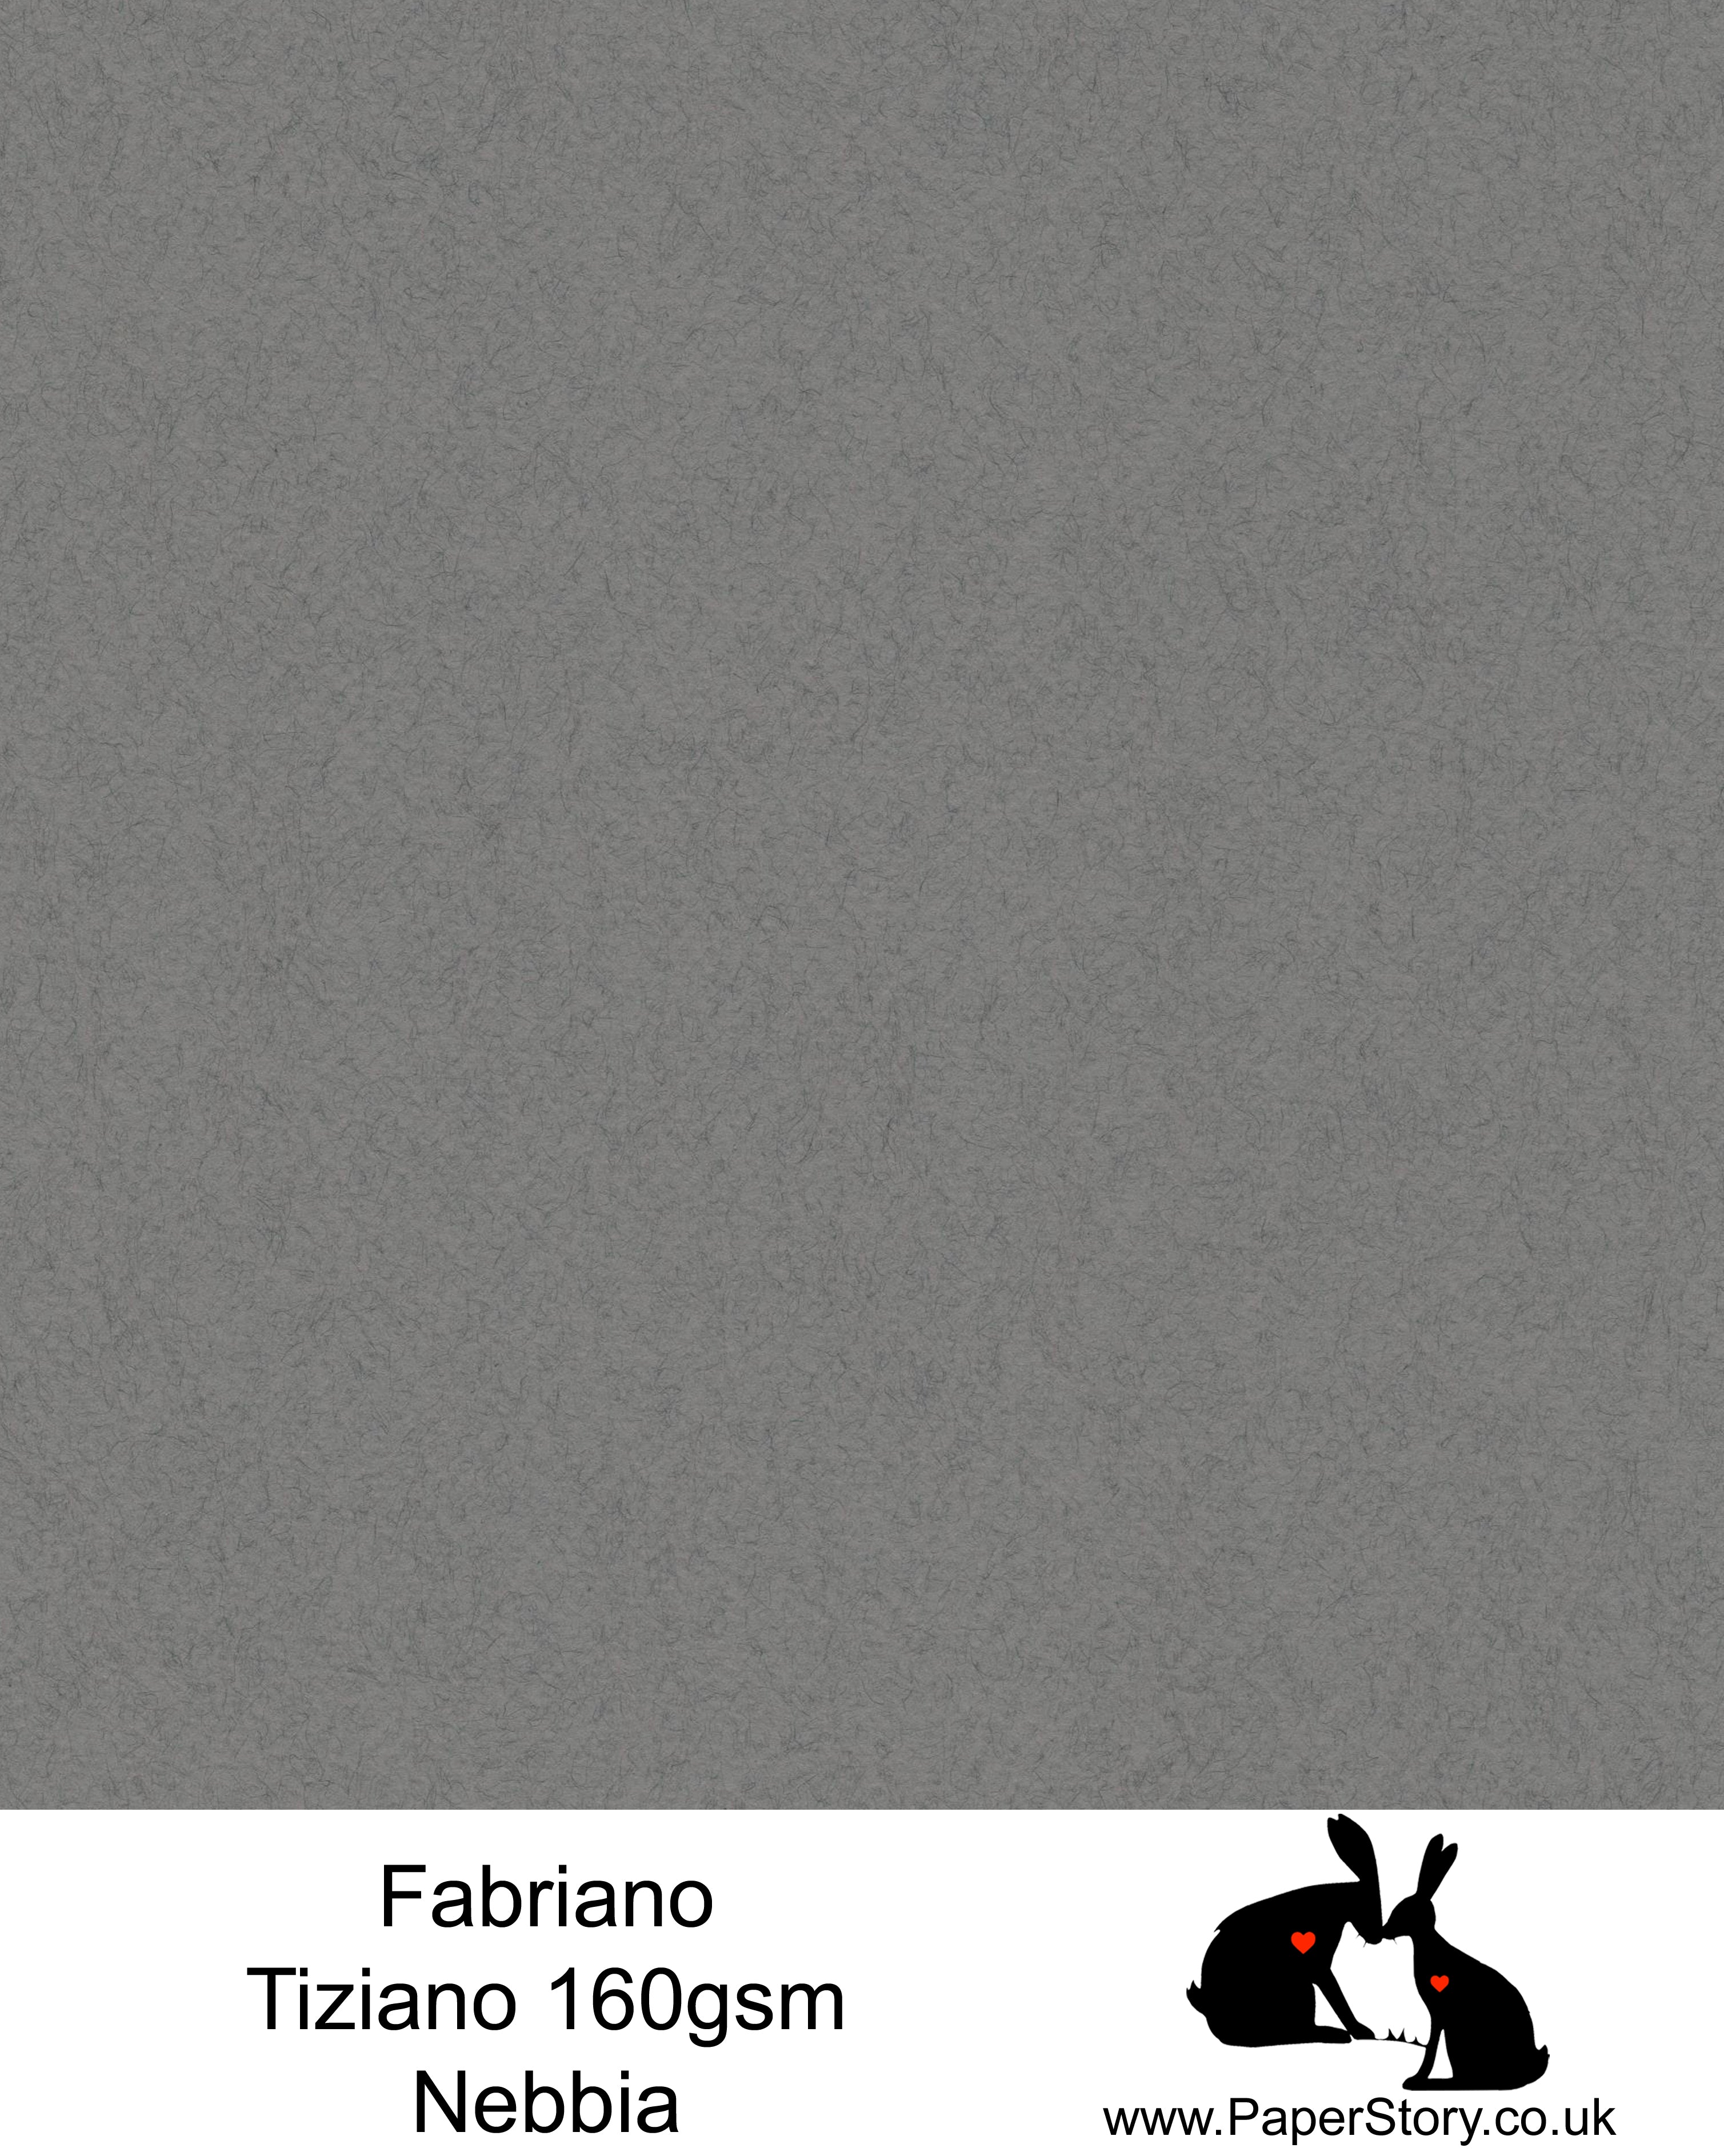 High quality paper from Italy, Nebbia, deep grey felted effect Fabriano Tiziano is 160 gsm, Tiziano has a high cotton content, a textured naturally sized surface. This paper is acid free to guarantee long permanence in time, pH neutral. It has highly lightfast colours, an excellent surface making and sizing which make this paper particularly suitable for papercutting, pastels, pencil, graphite, charcoal, tempera, air brush and watercolour techniques. Tiziano can be used for all printing techniques.